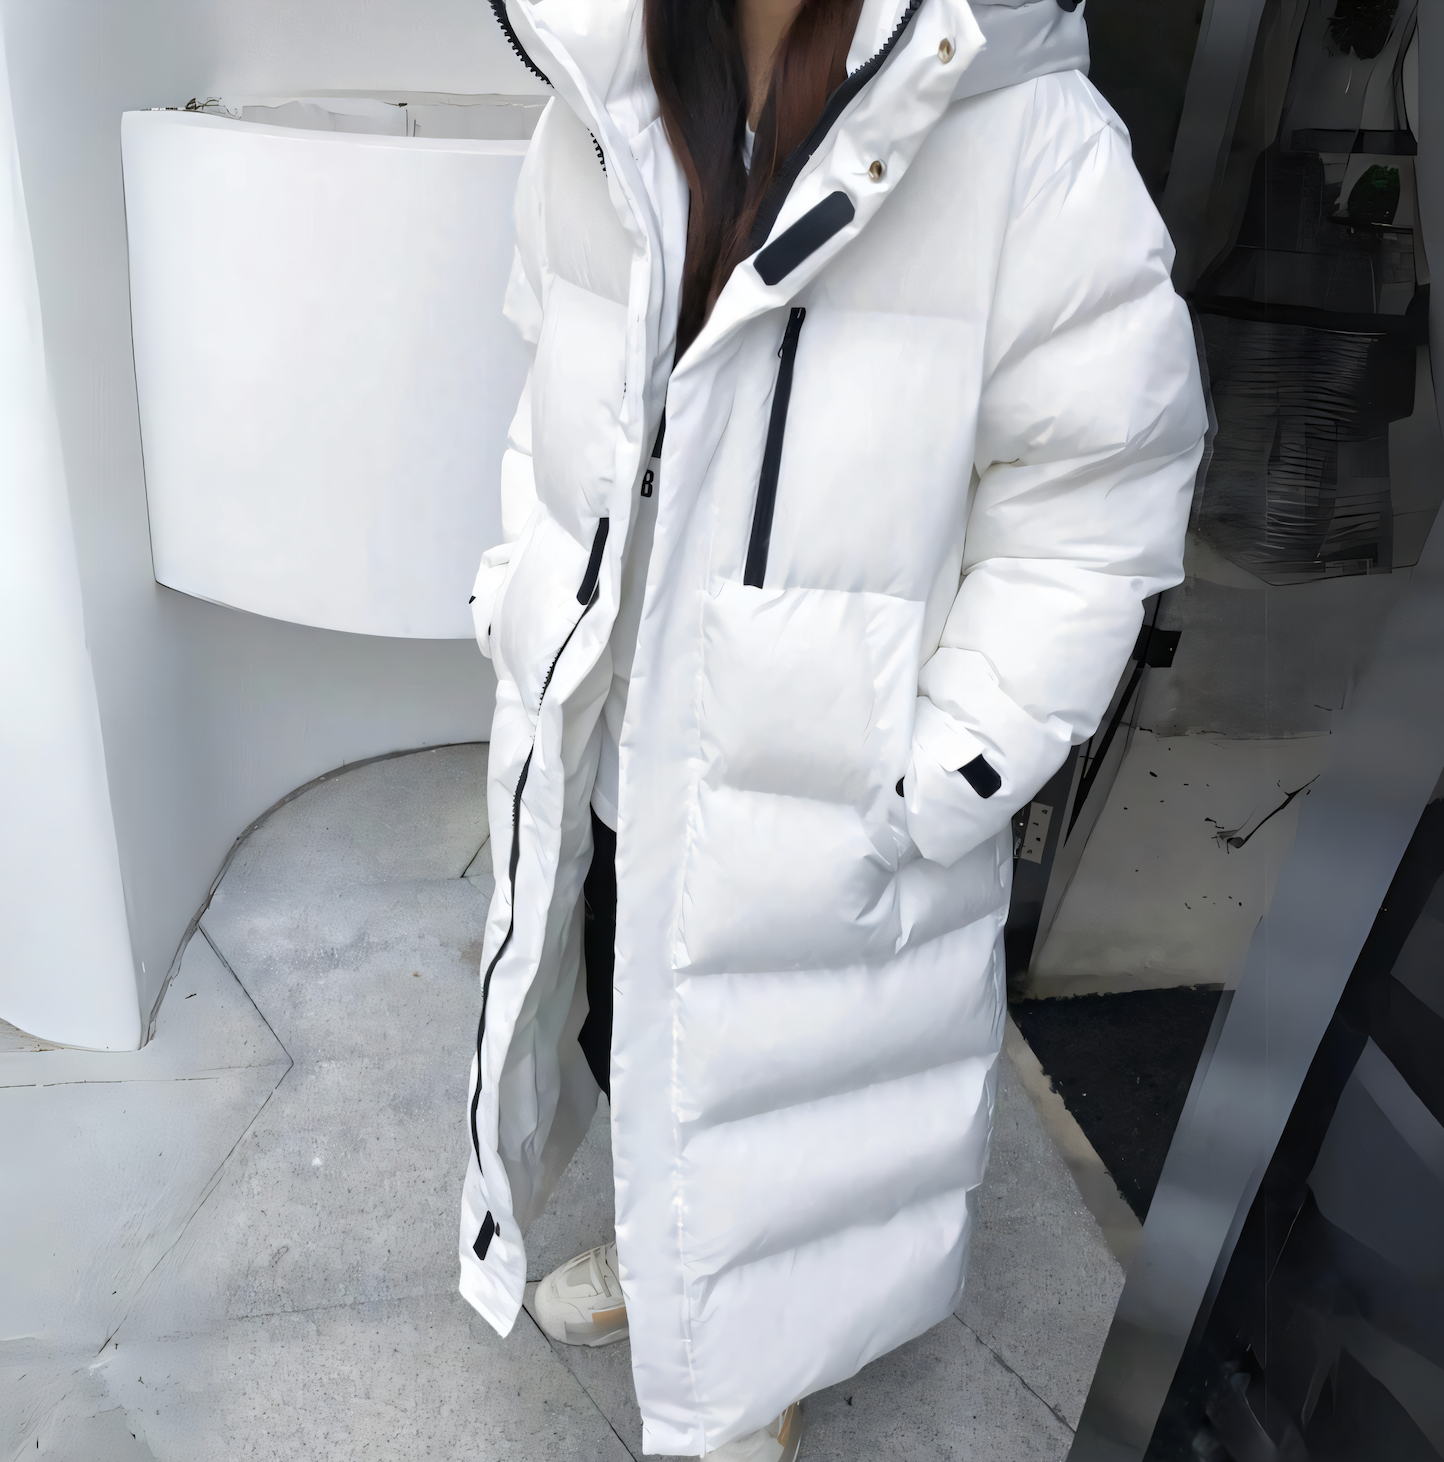 Windproof long jacket with hood for winter